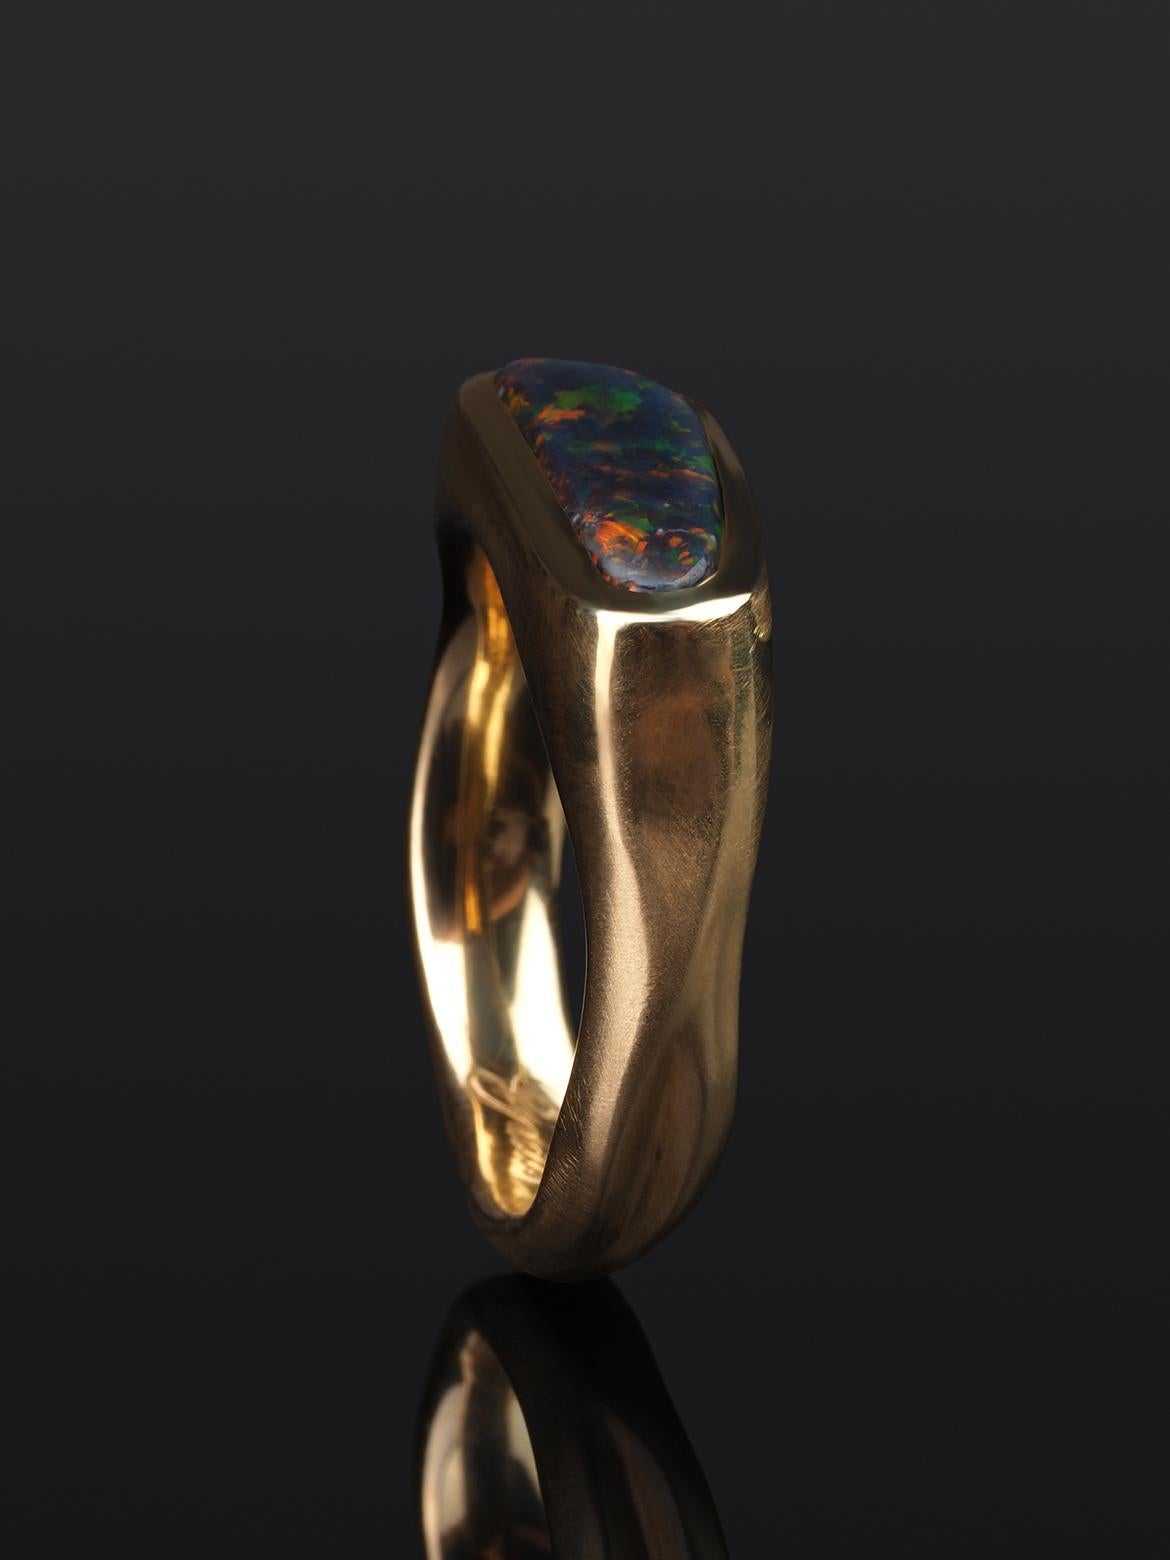 Cabochon Black Opal Gold Ring Unises Stardust Pattern Engagement Style For Sale